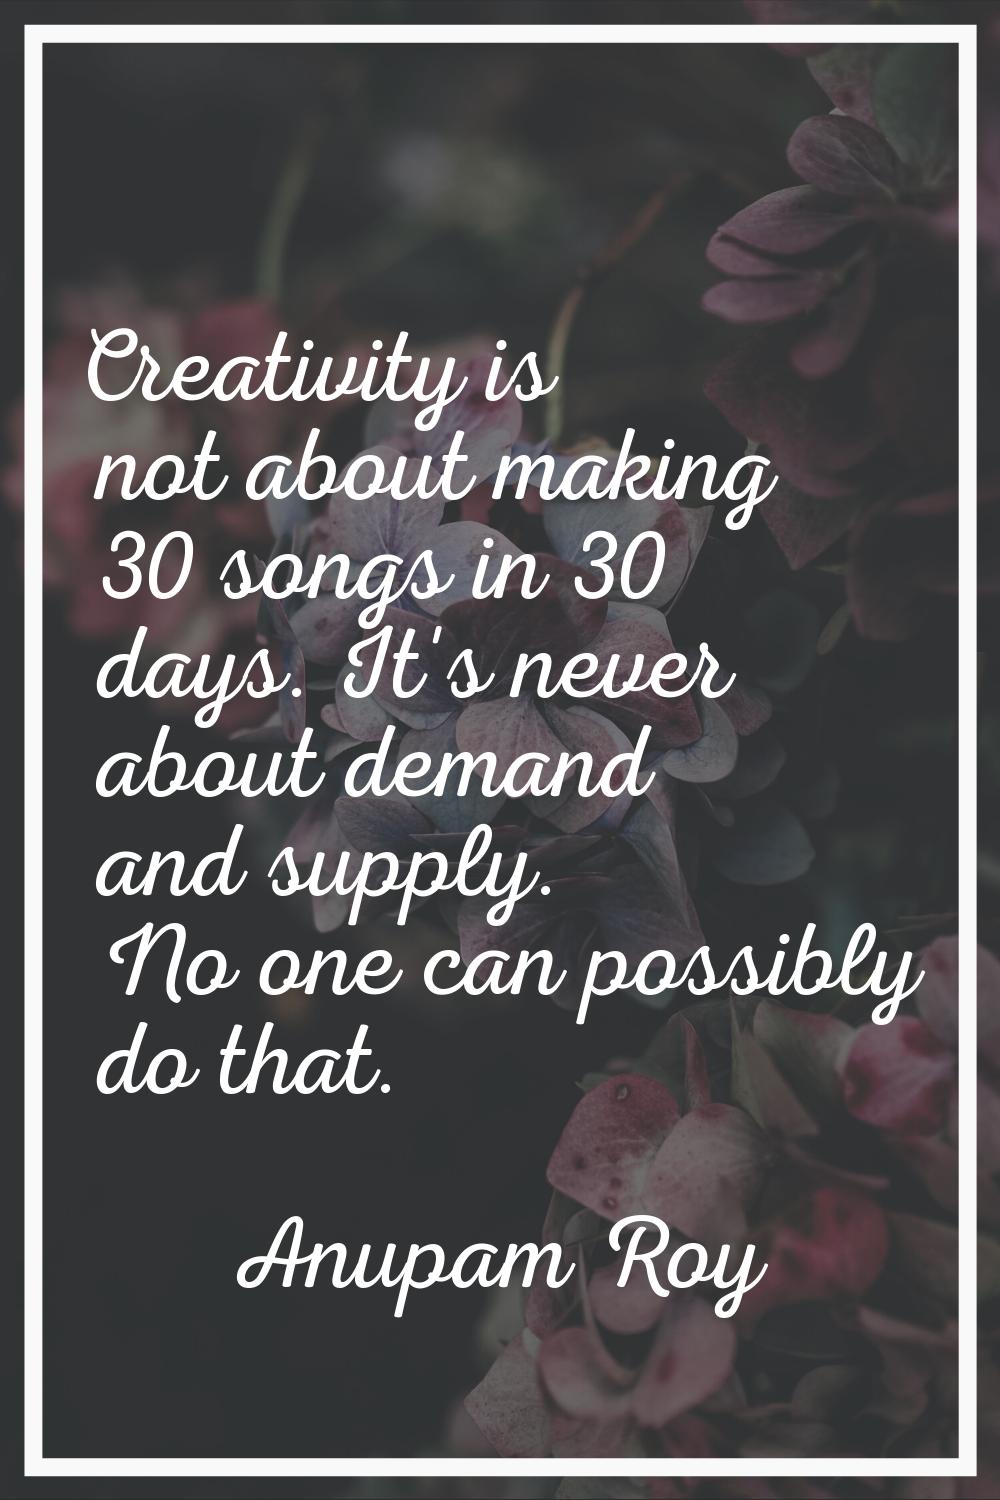 Creativity is not about making 30 songs in 30 days. It's never about demand and supply. No one can 